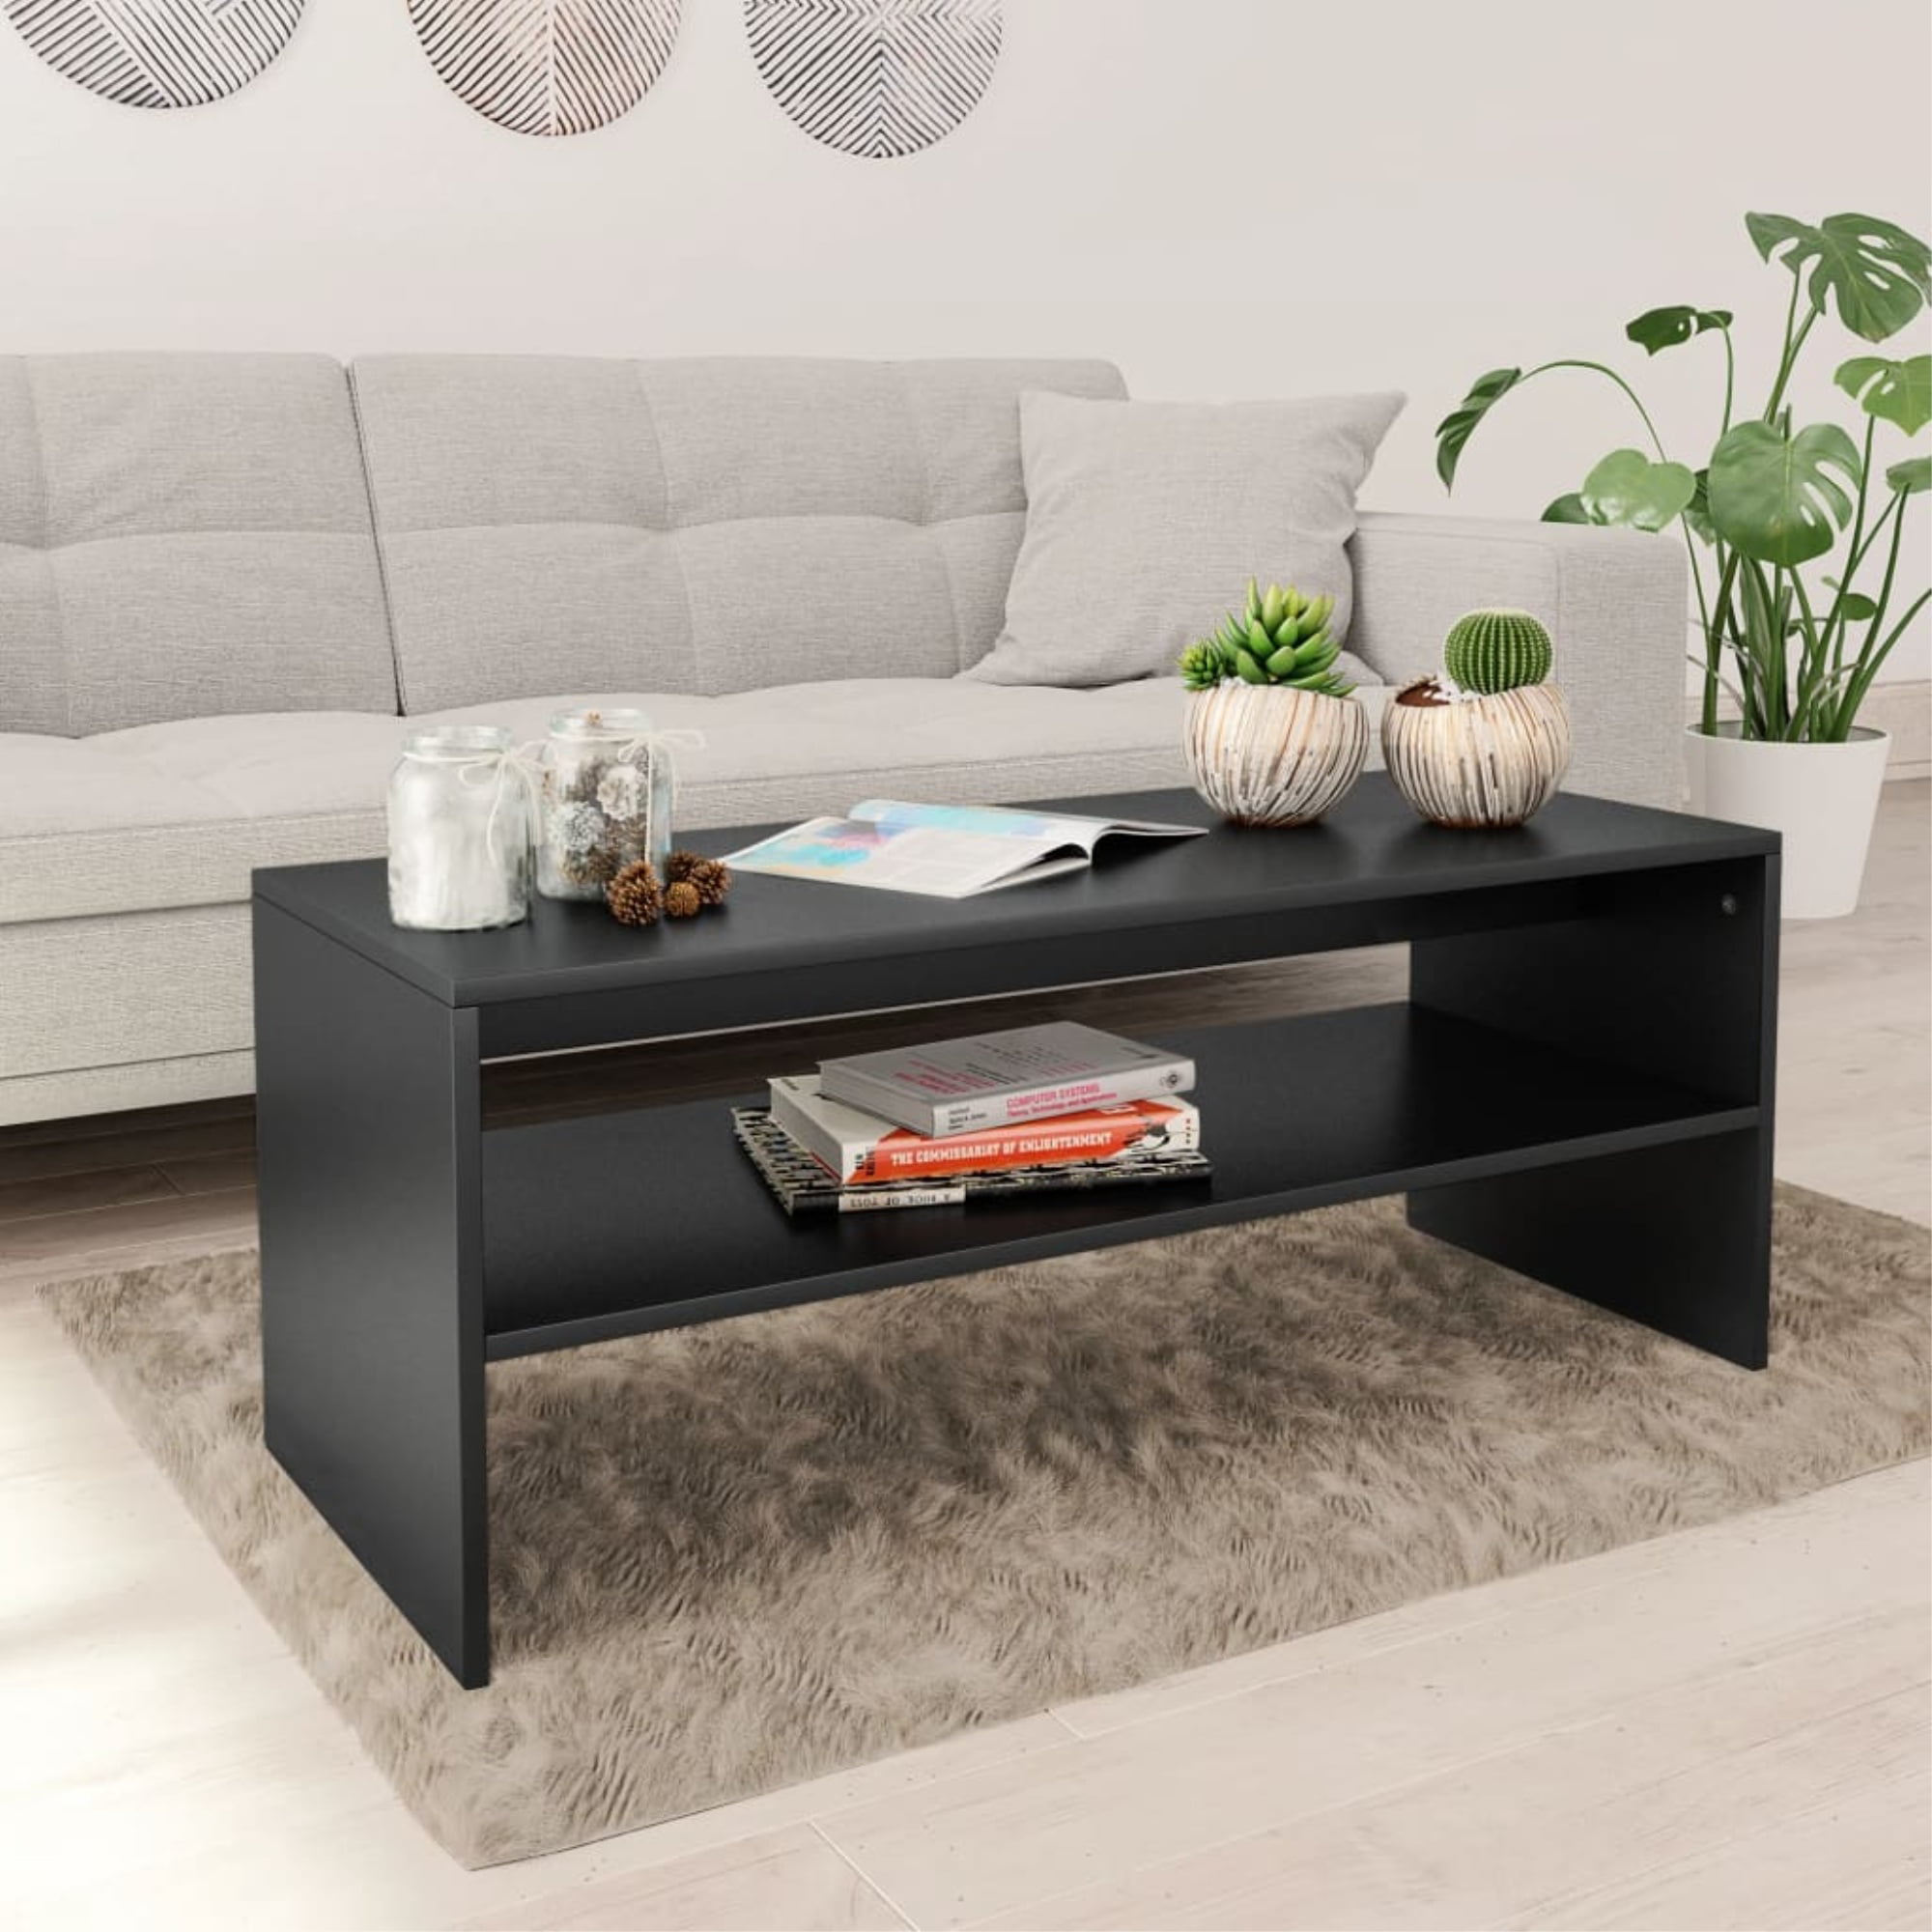 37" Modern High Gloss Coffee Table Side End Table Living Room Furniture w/Drawer 